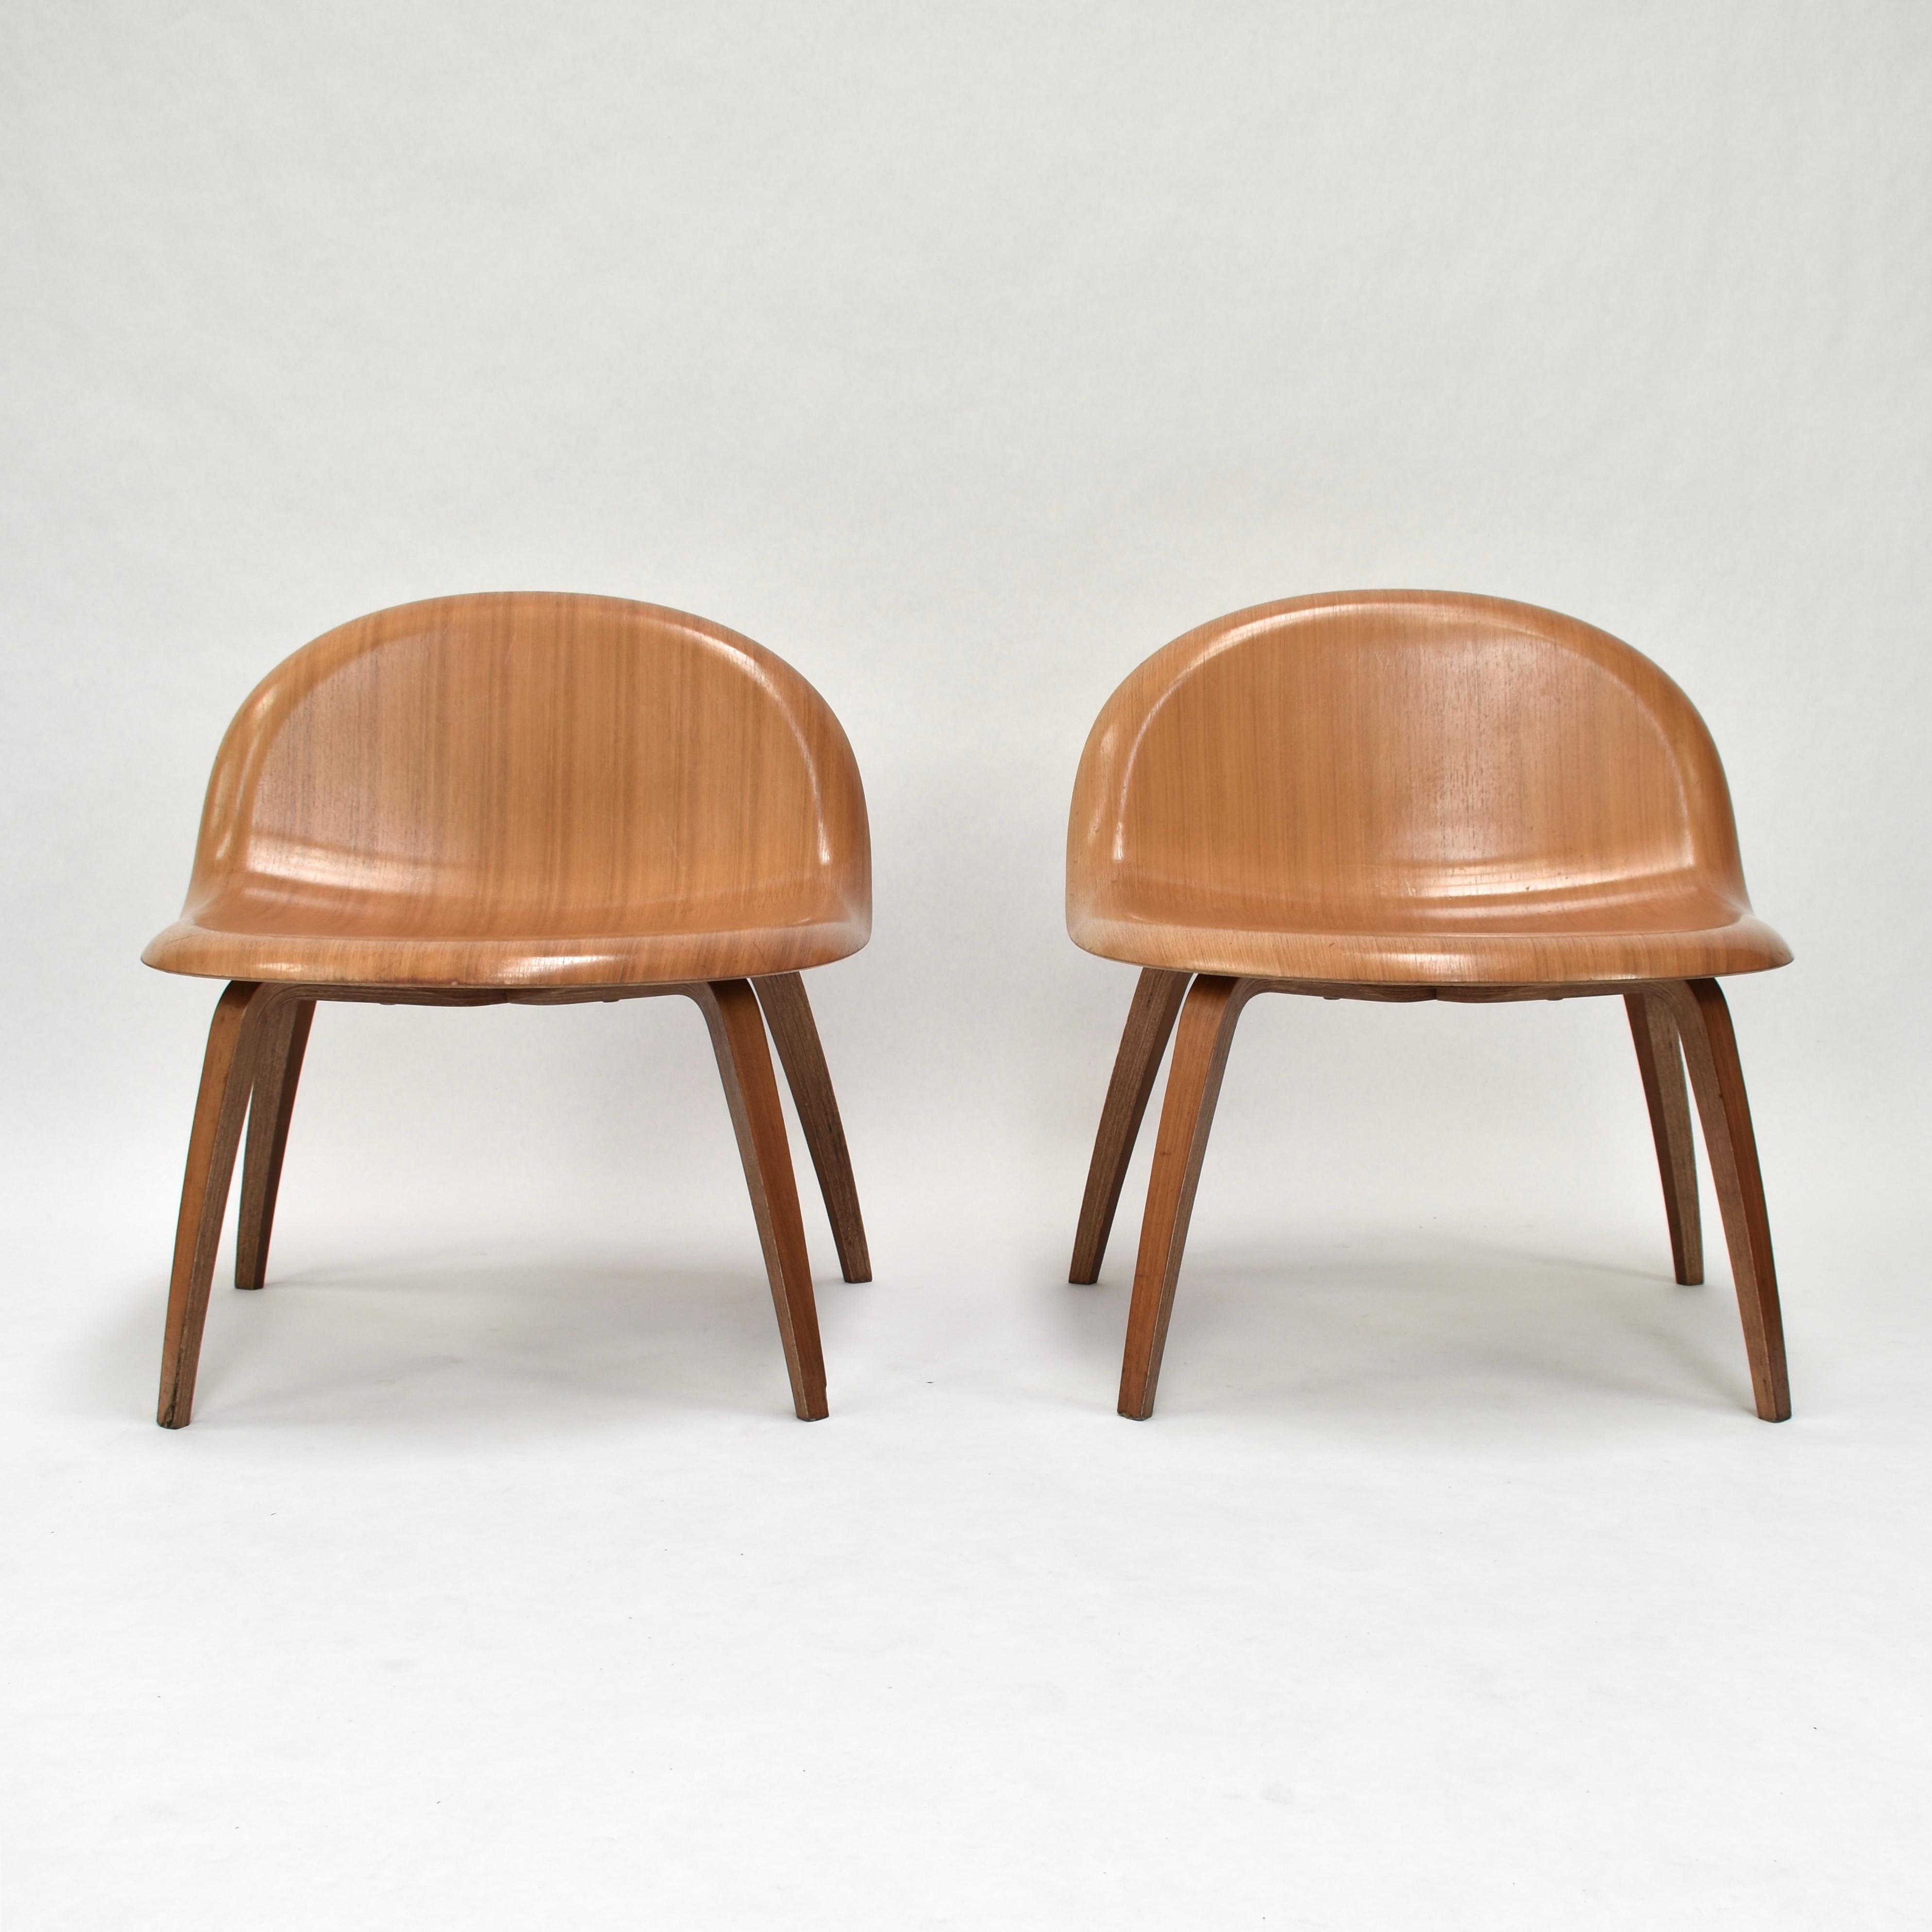 Danish Molded Plywood Lounge Chairs by Boris Berlin and Poul Christiansen for Komplot